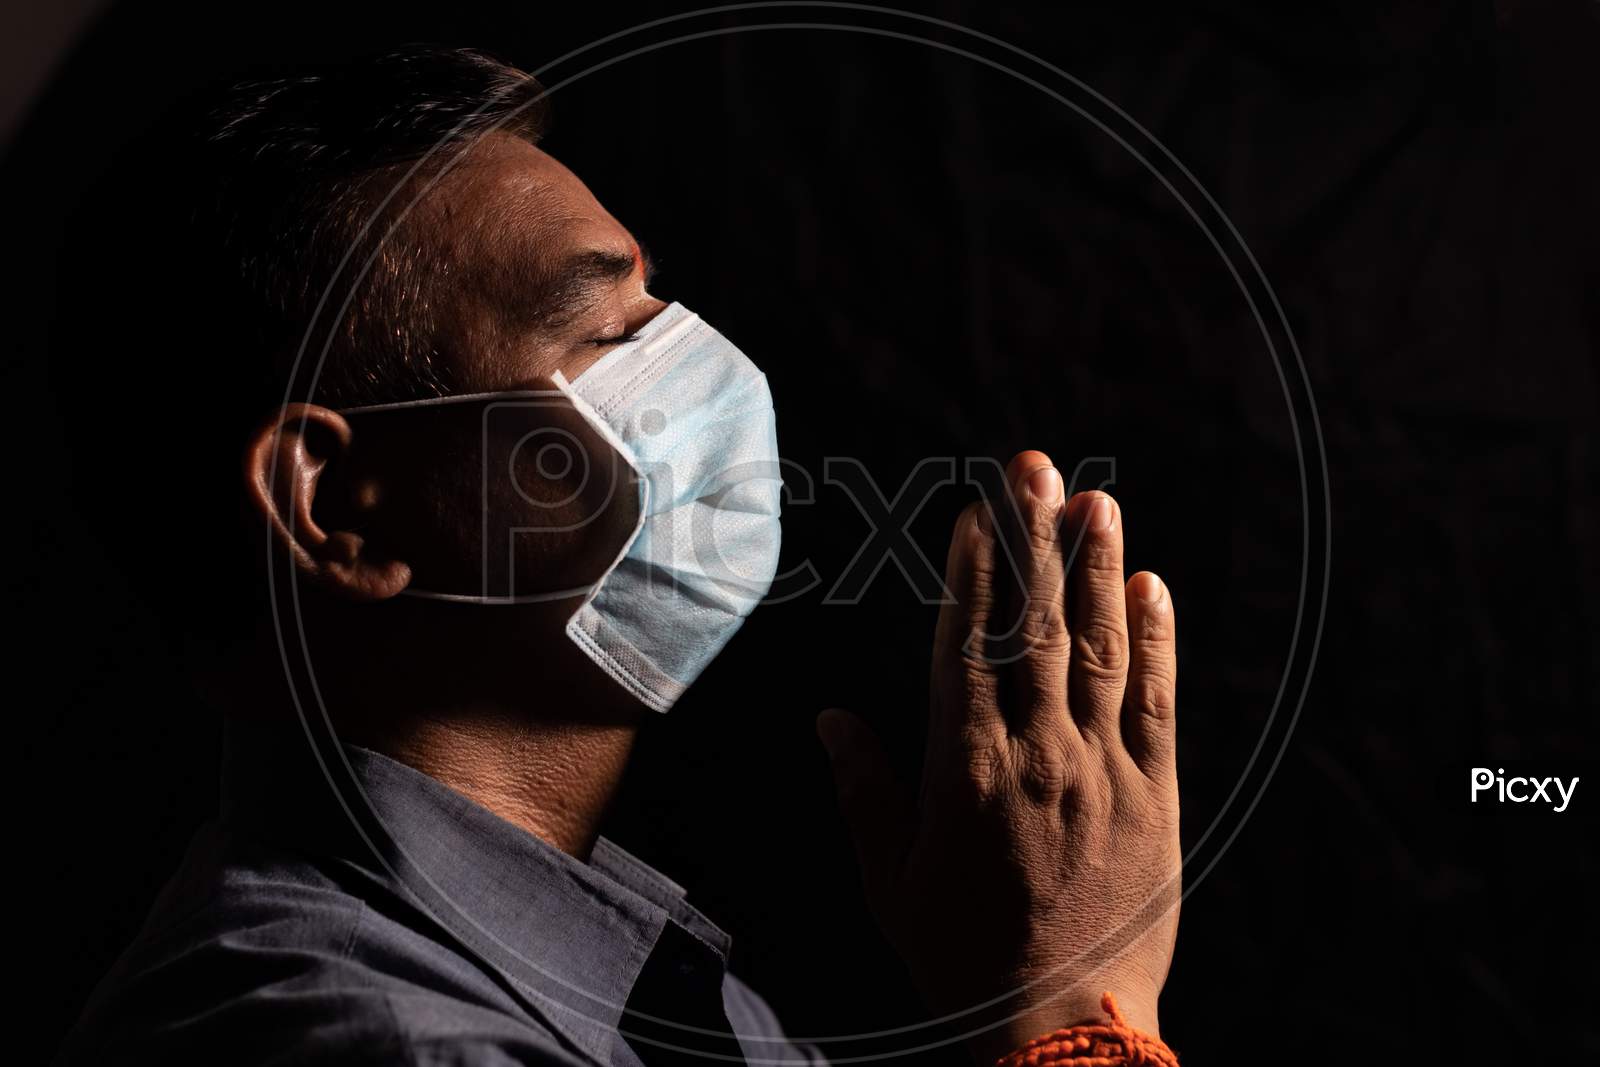 Man With Medical Mask Praying To God By Closing Eyes In Dark Room To Protect Or Save From Covid-19 Or Coronavirus Crisis - Spirituality And Surrender Concept.